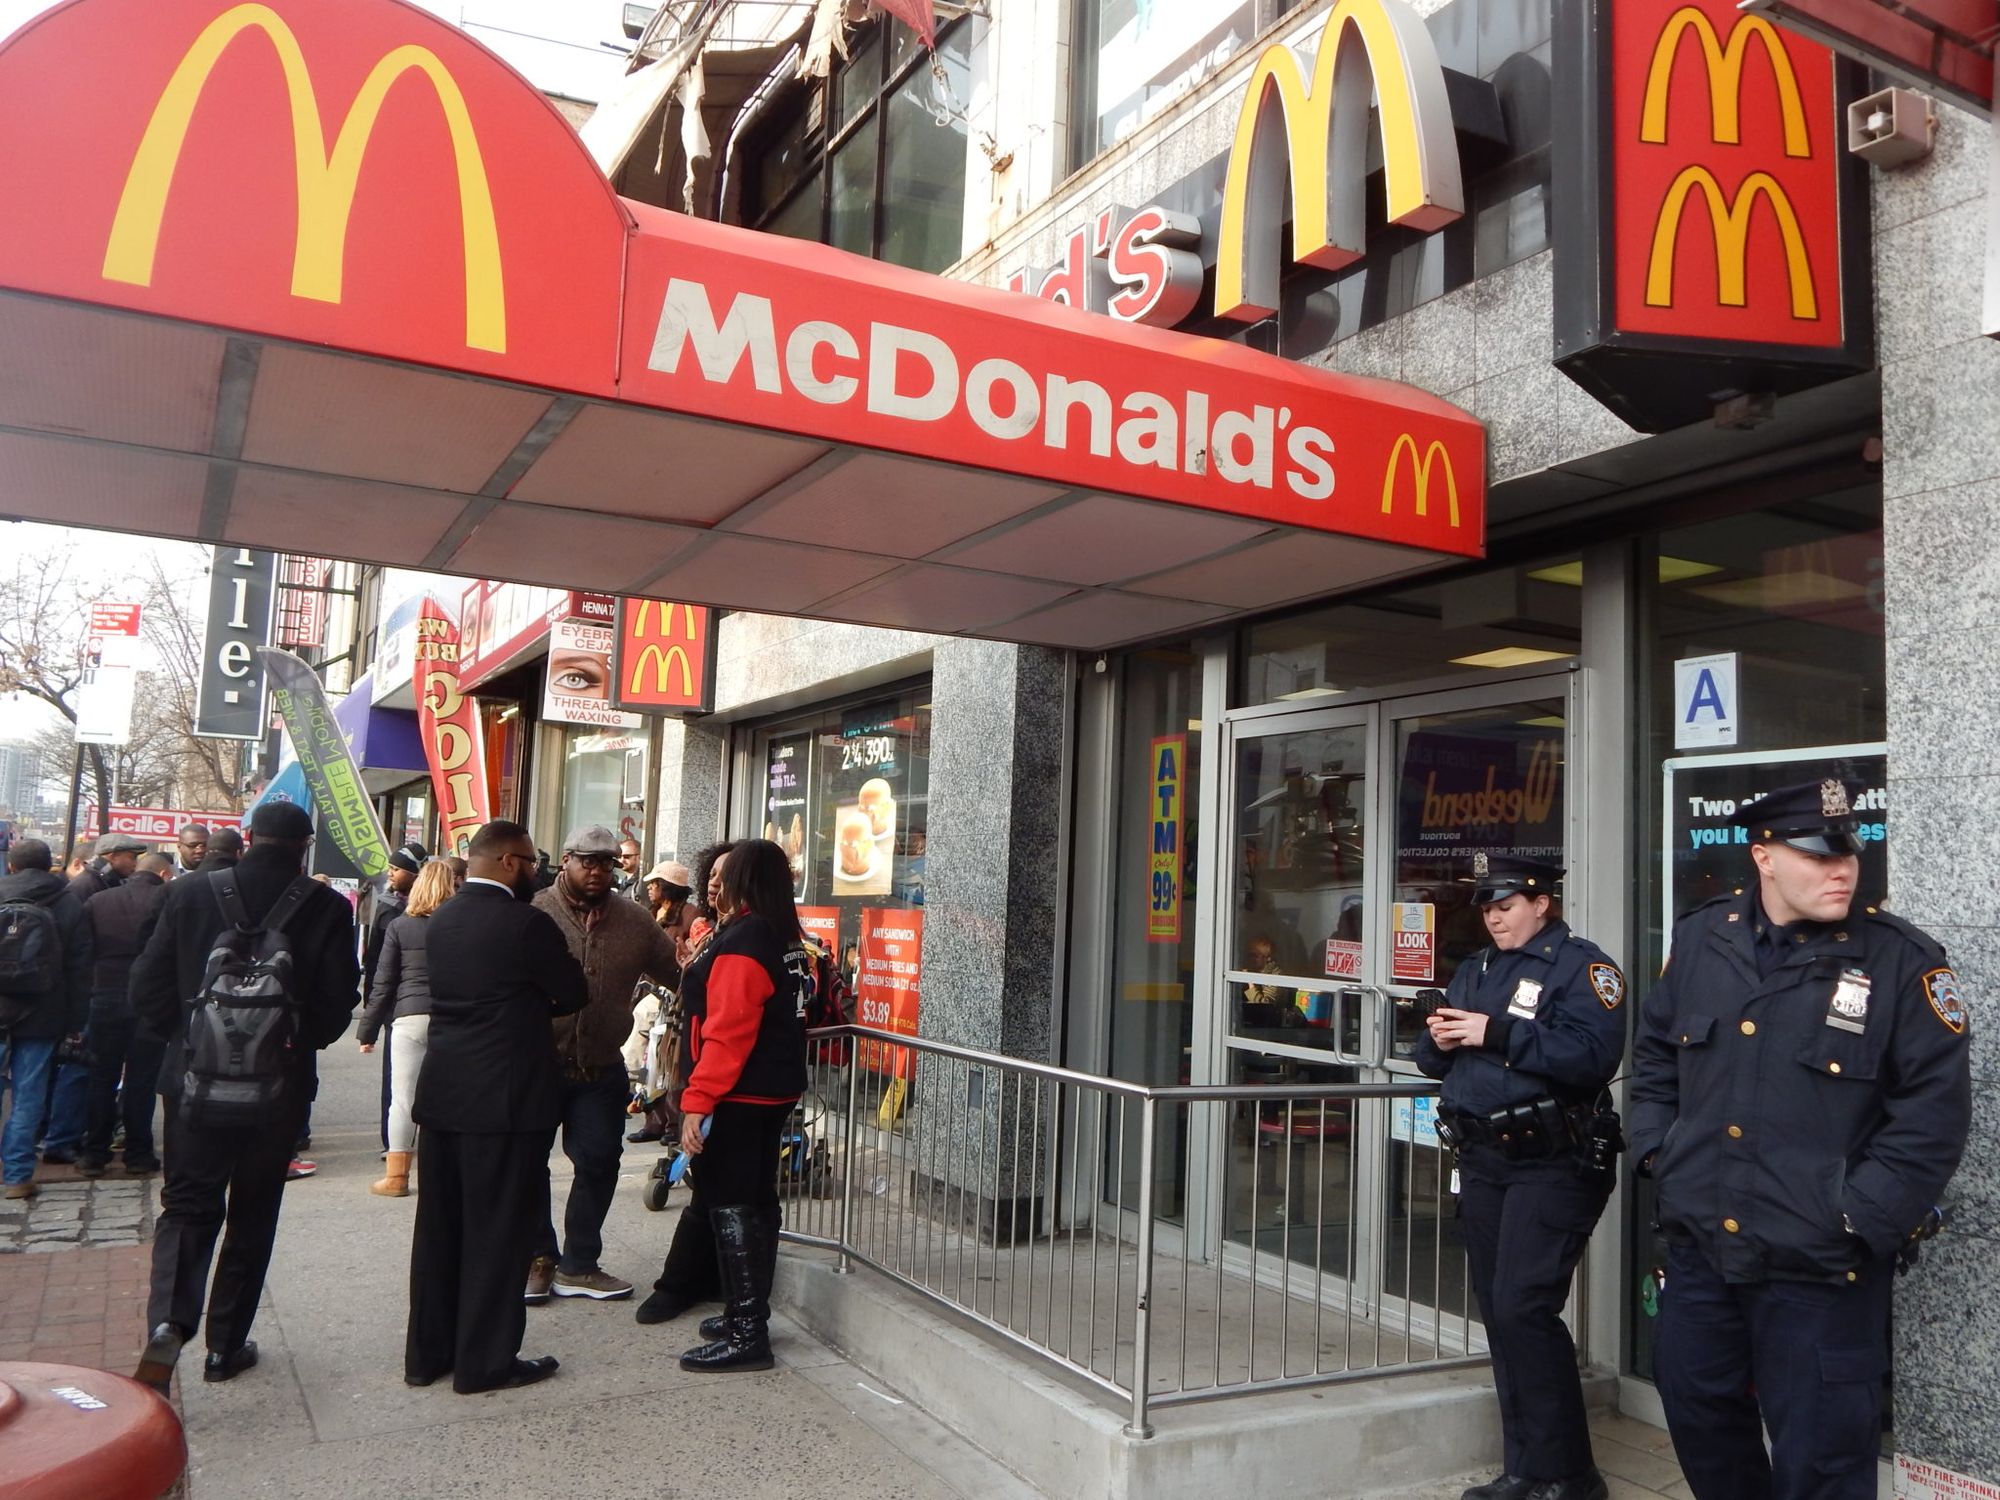 Leader Of Vicious Flatbush McDonald’s Attack To Be Admitted For Psychiatric Care